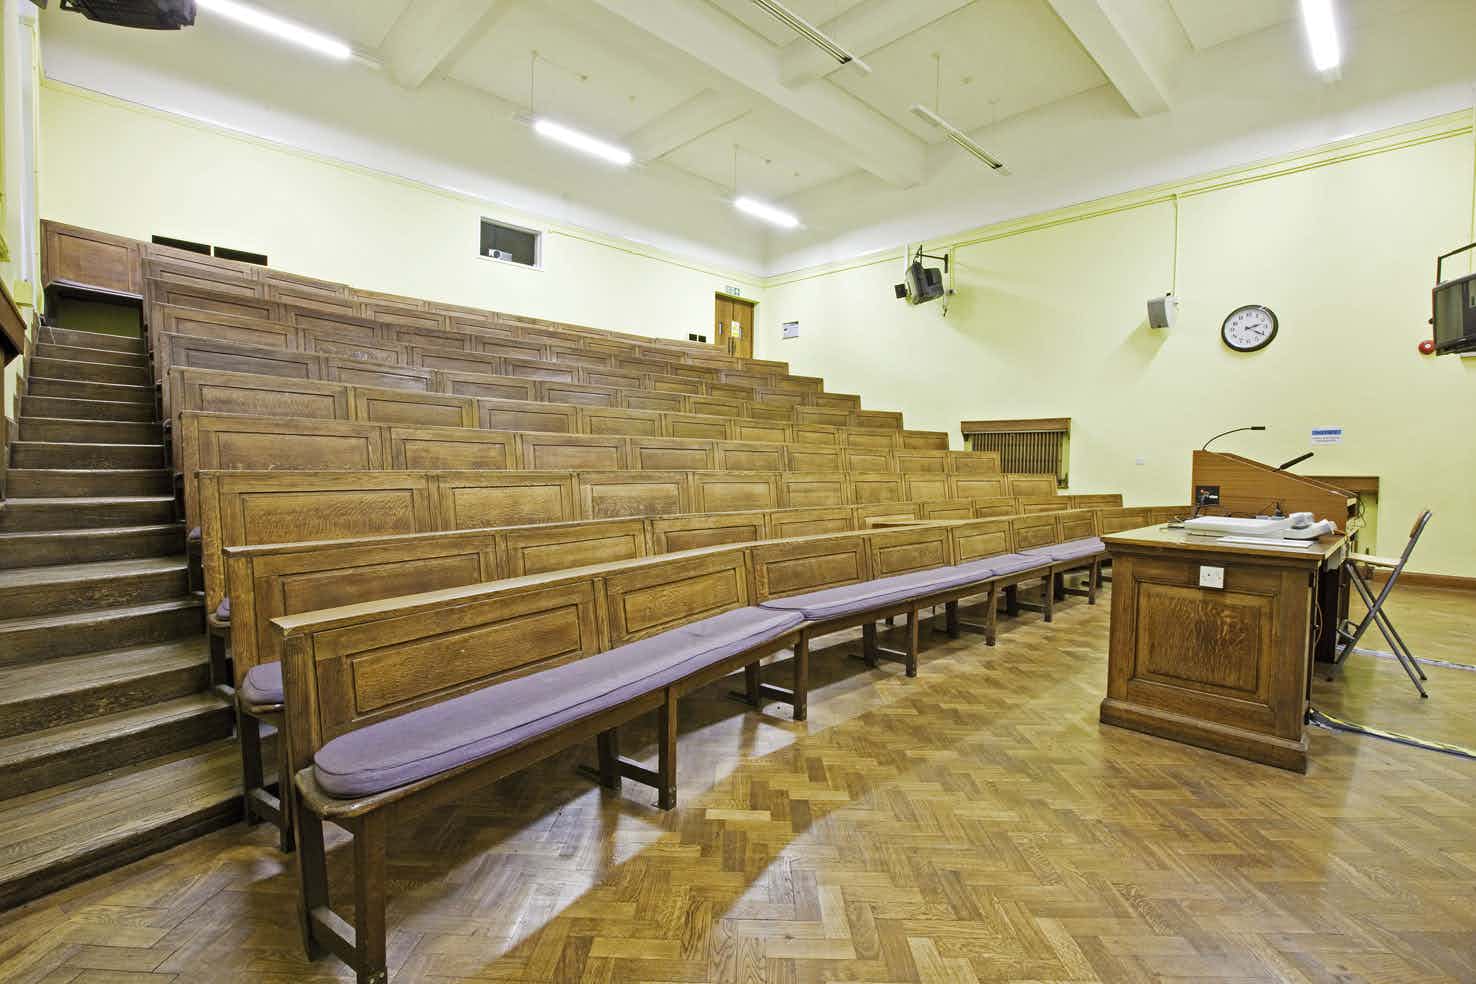 Rotblat Lecture Theatre , Queen Mary Venues - Charterhouse Square 